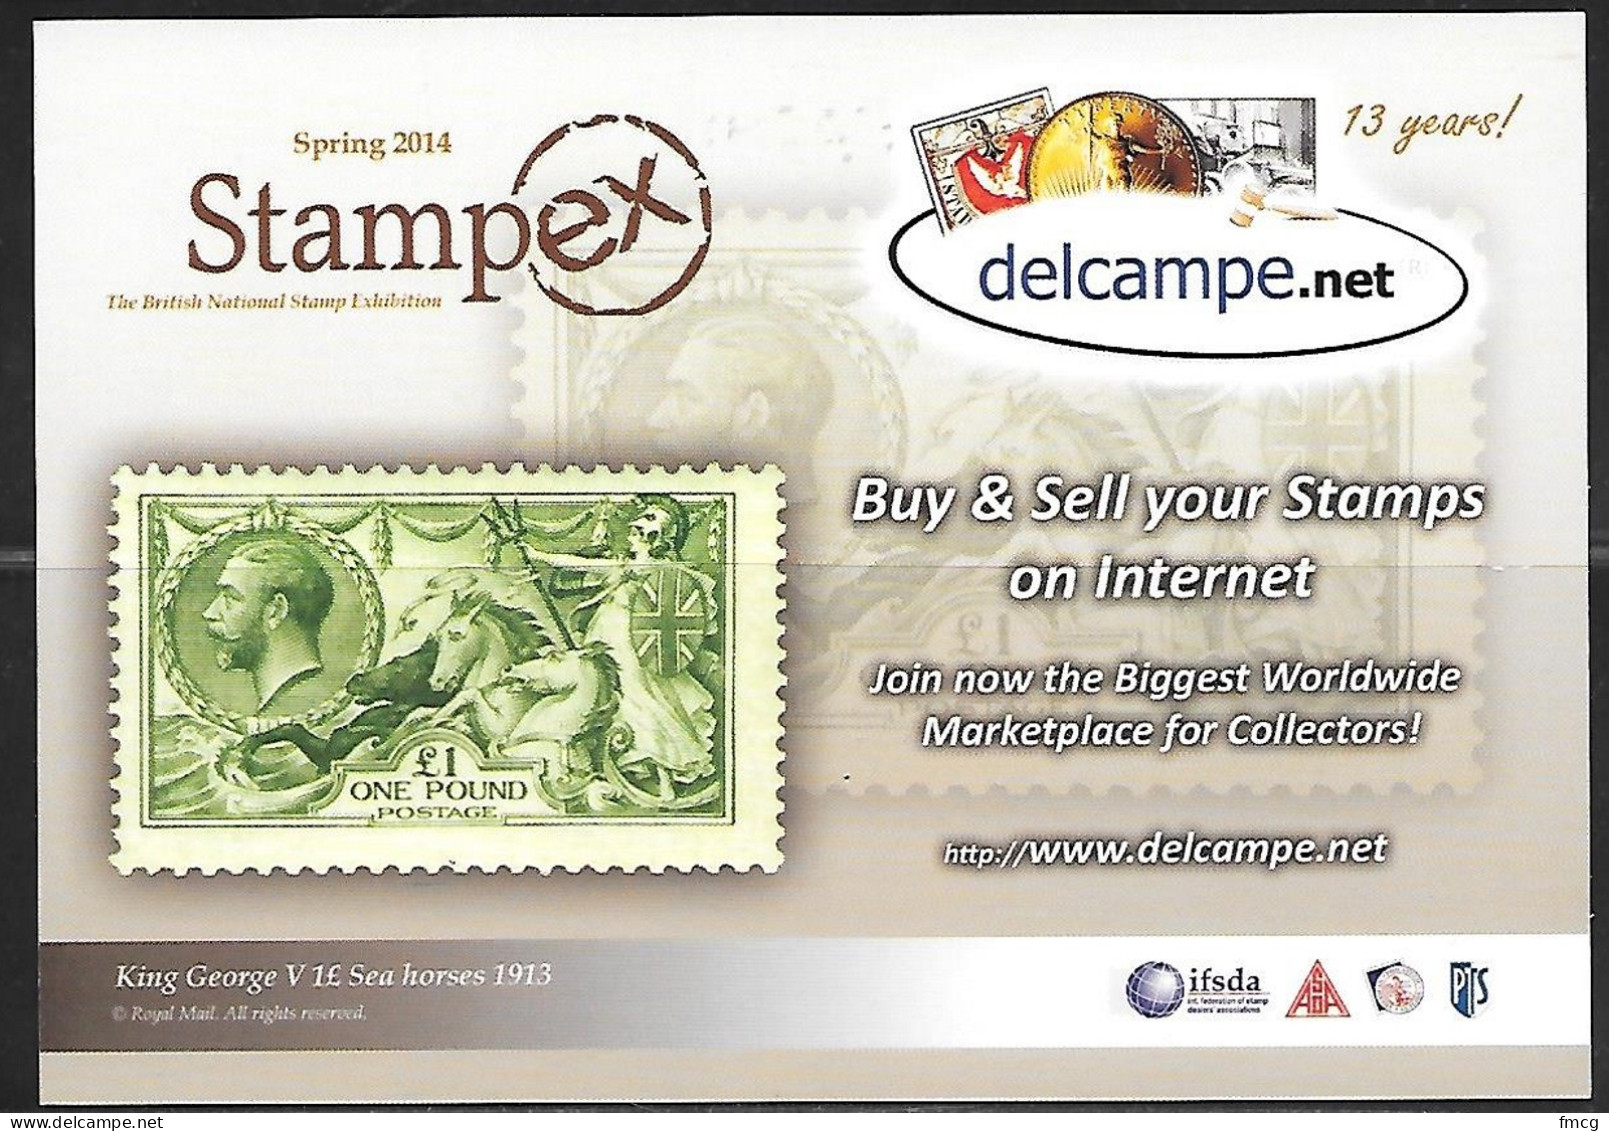 Delcampe, 2014 STAMPEX Card, Unused - Stamps (pictures)